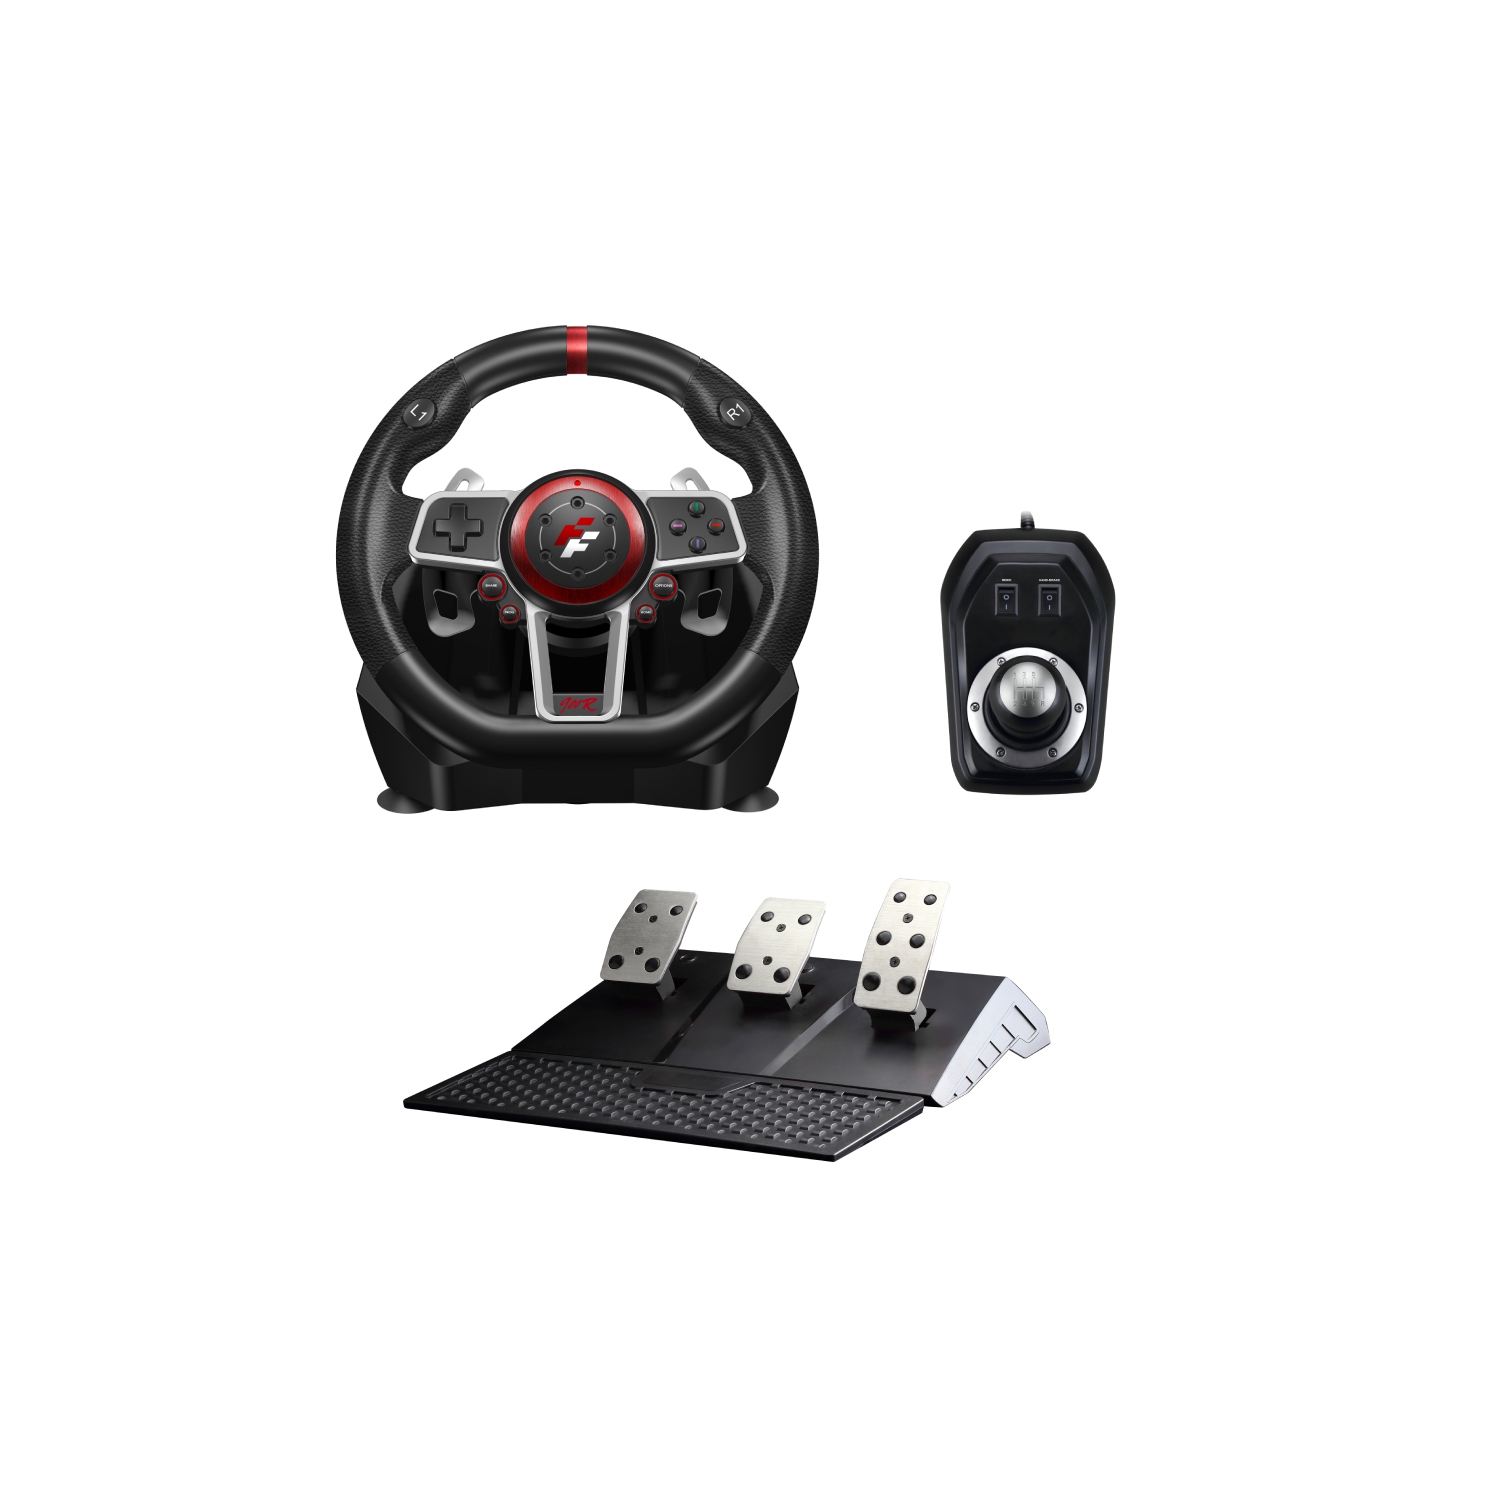 Flashfire ES900R SUZUKA Racing Wheel Set with Clutch - Compatible with PC, PS3, PS4, Xbox 360, XBOX ONE, XBOX series X, XBOX series S and Nintendo Switch.